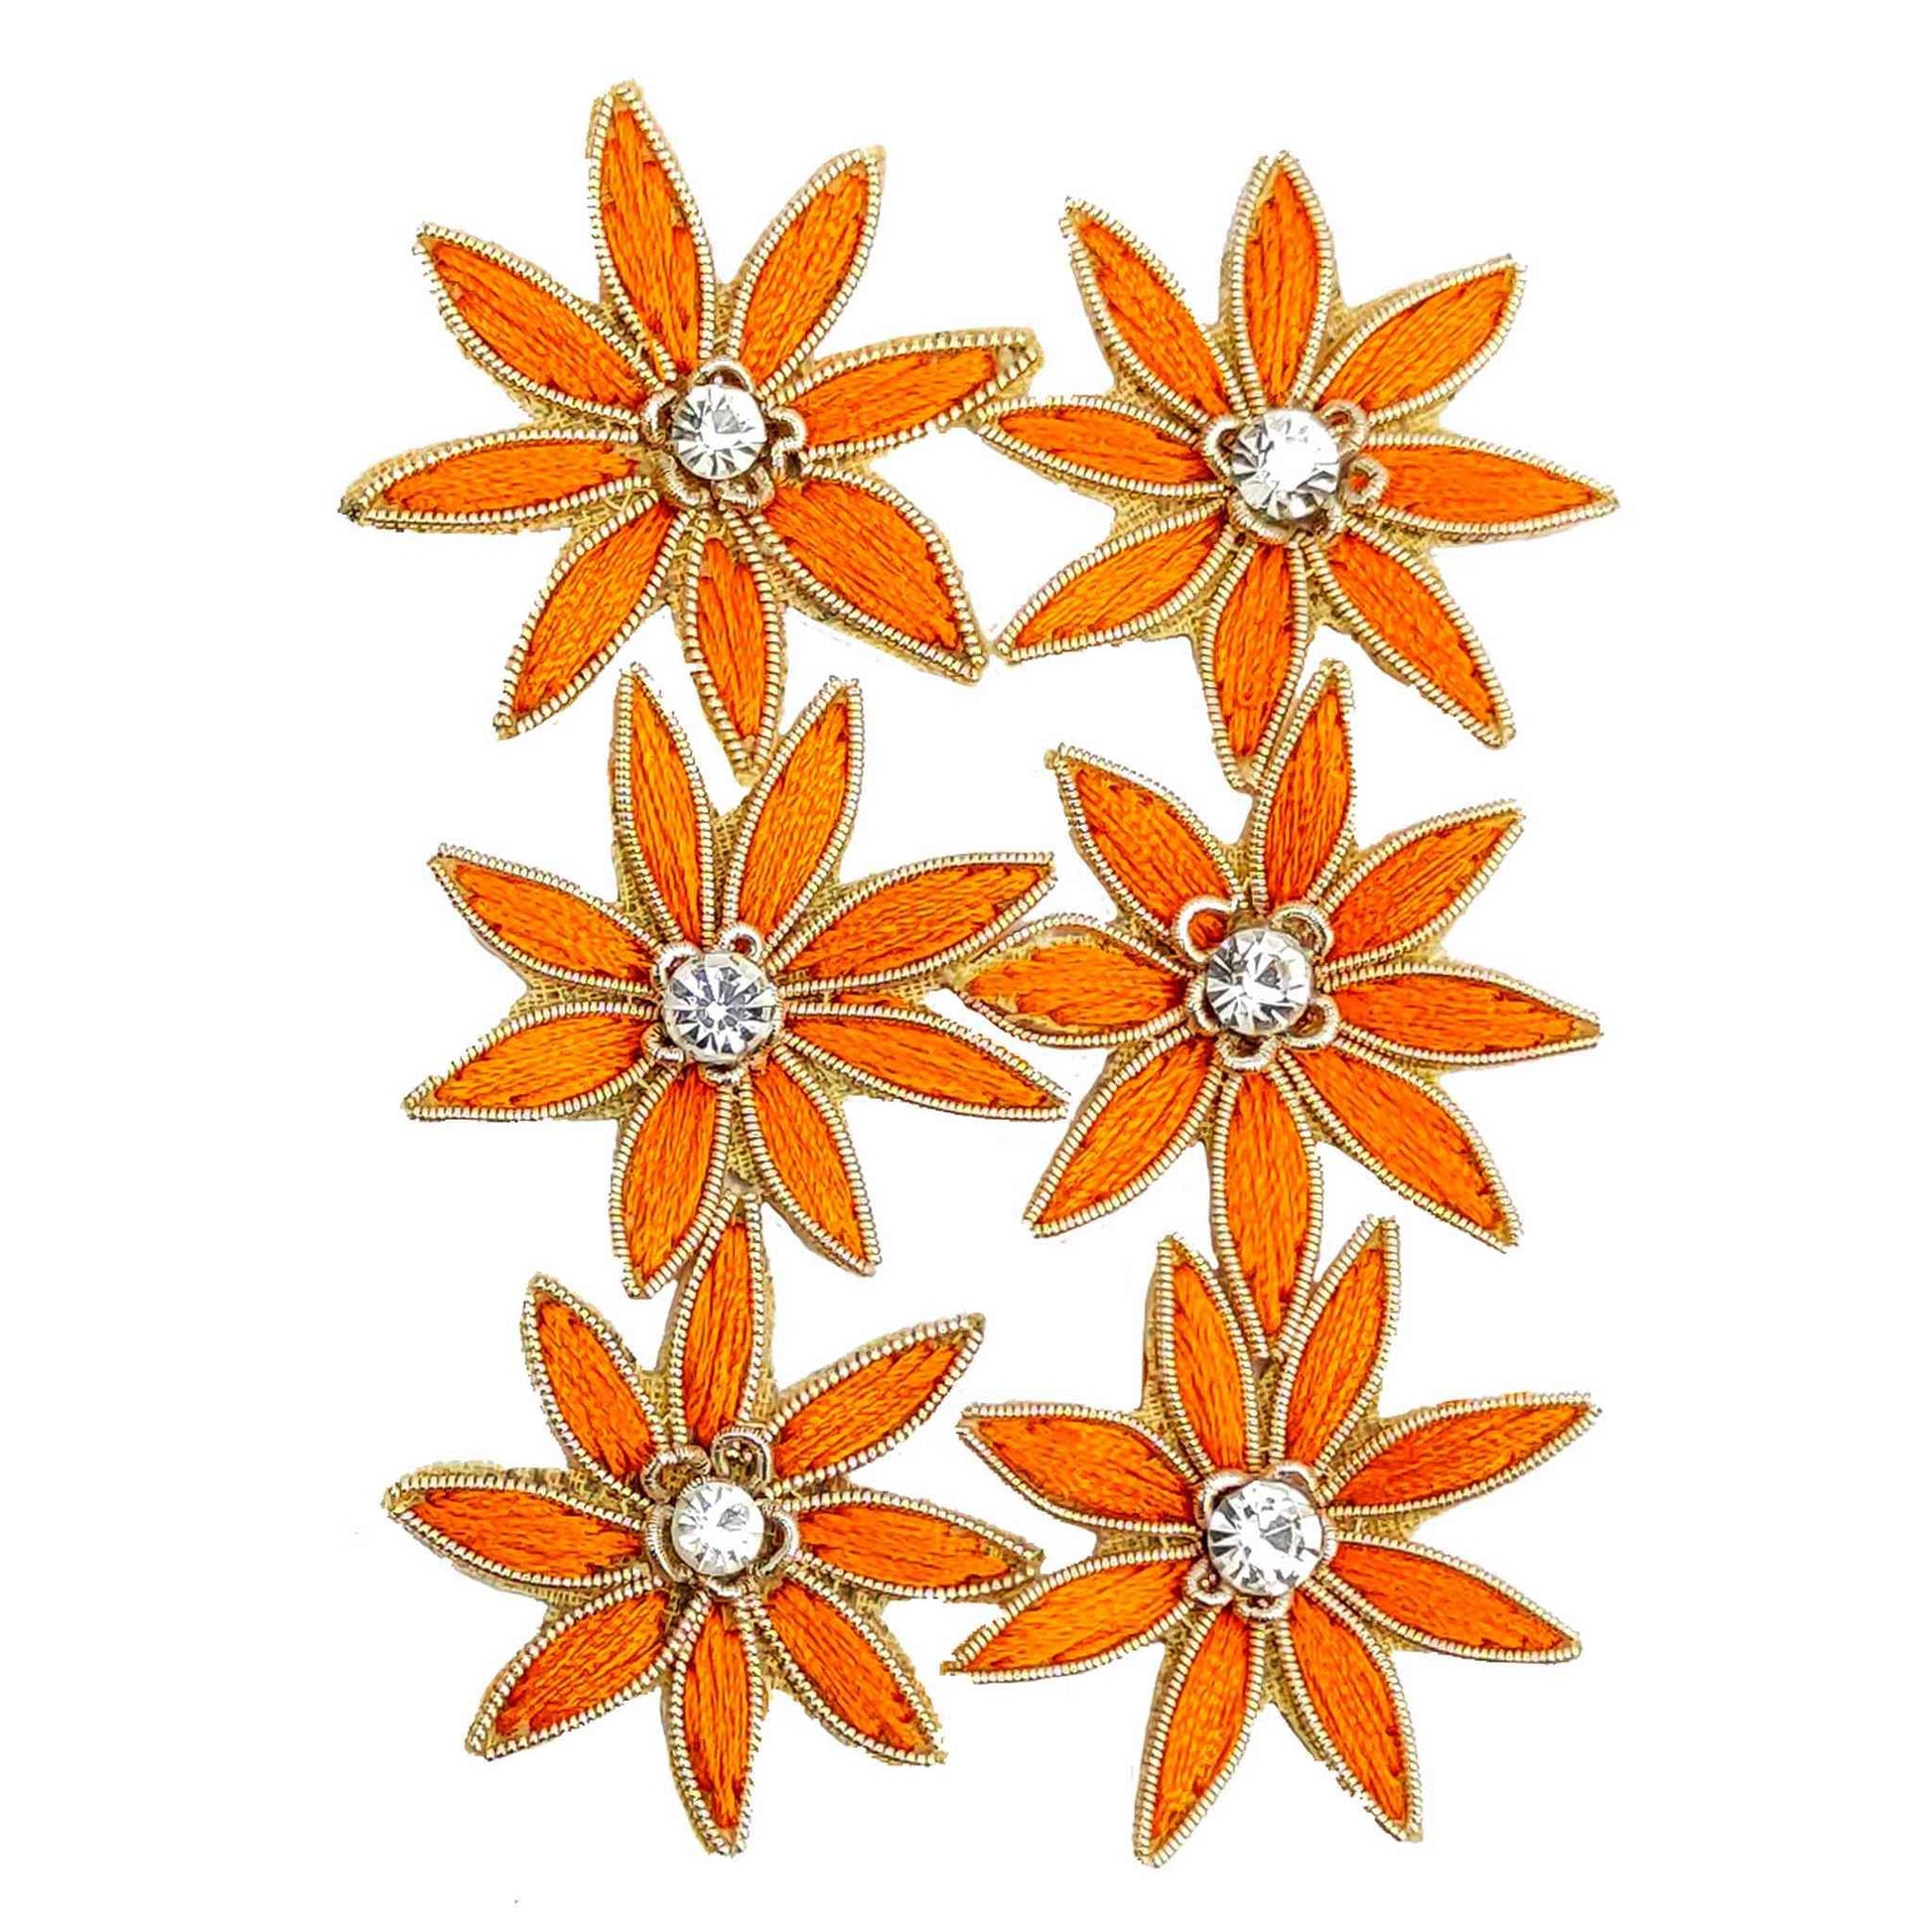 Indian Petals Threaded Strar Style Buti for DIY Craft, Trousseau Packing or Decoration (Bunch of 12) - Design 215, Orange - Indian Petals